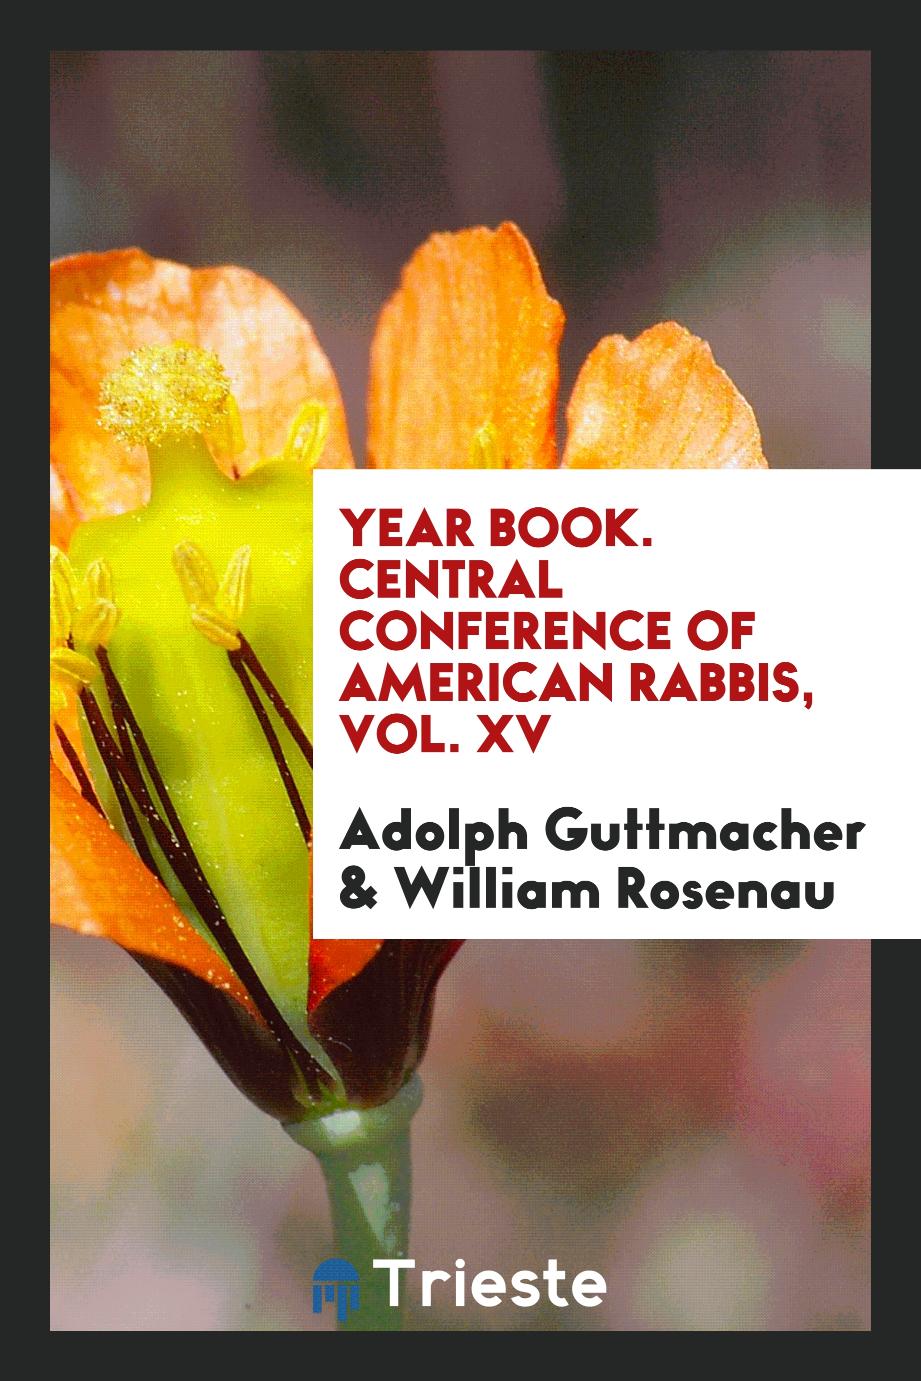 Year book. Central Conference of American Rabbis, Vol. XV